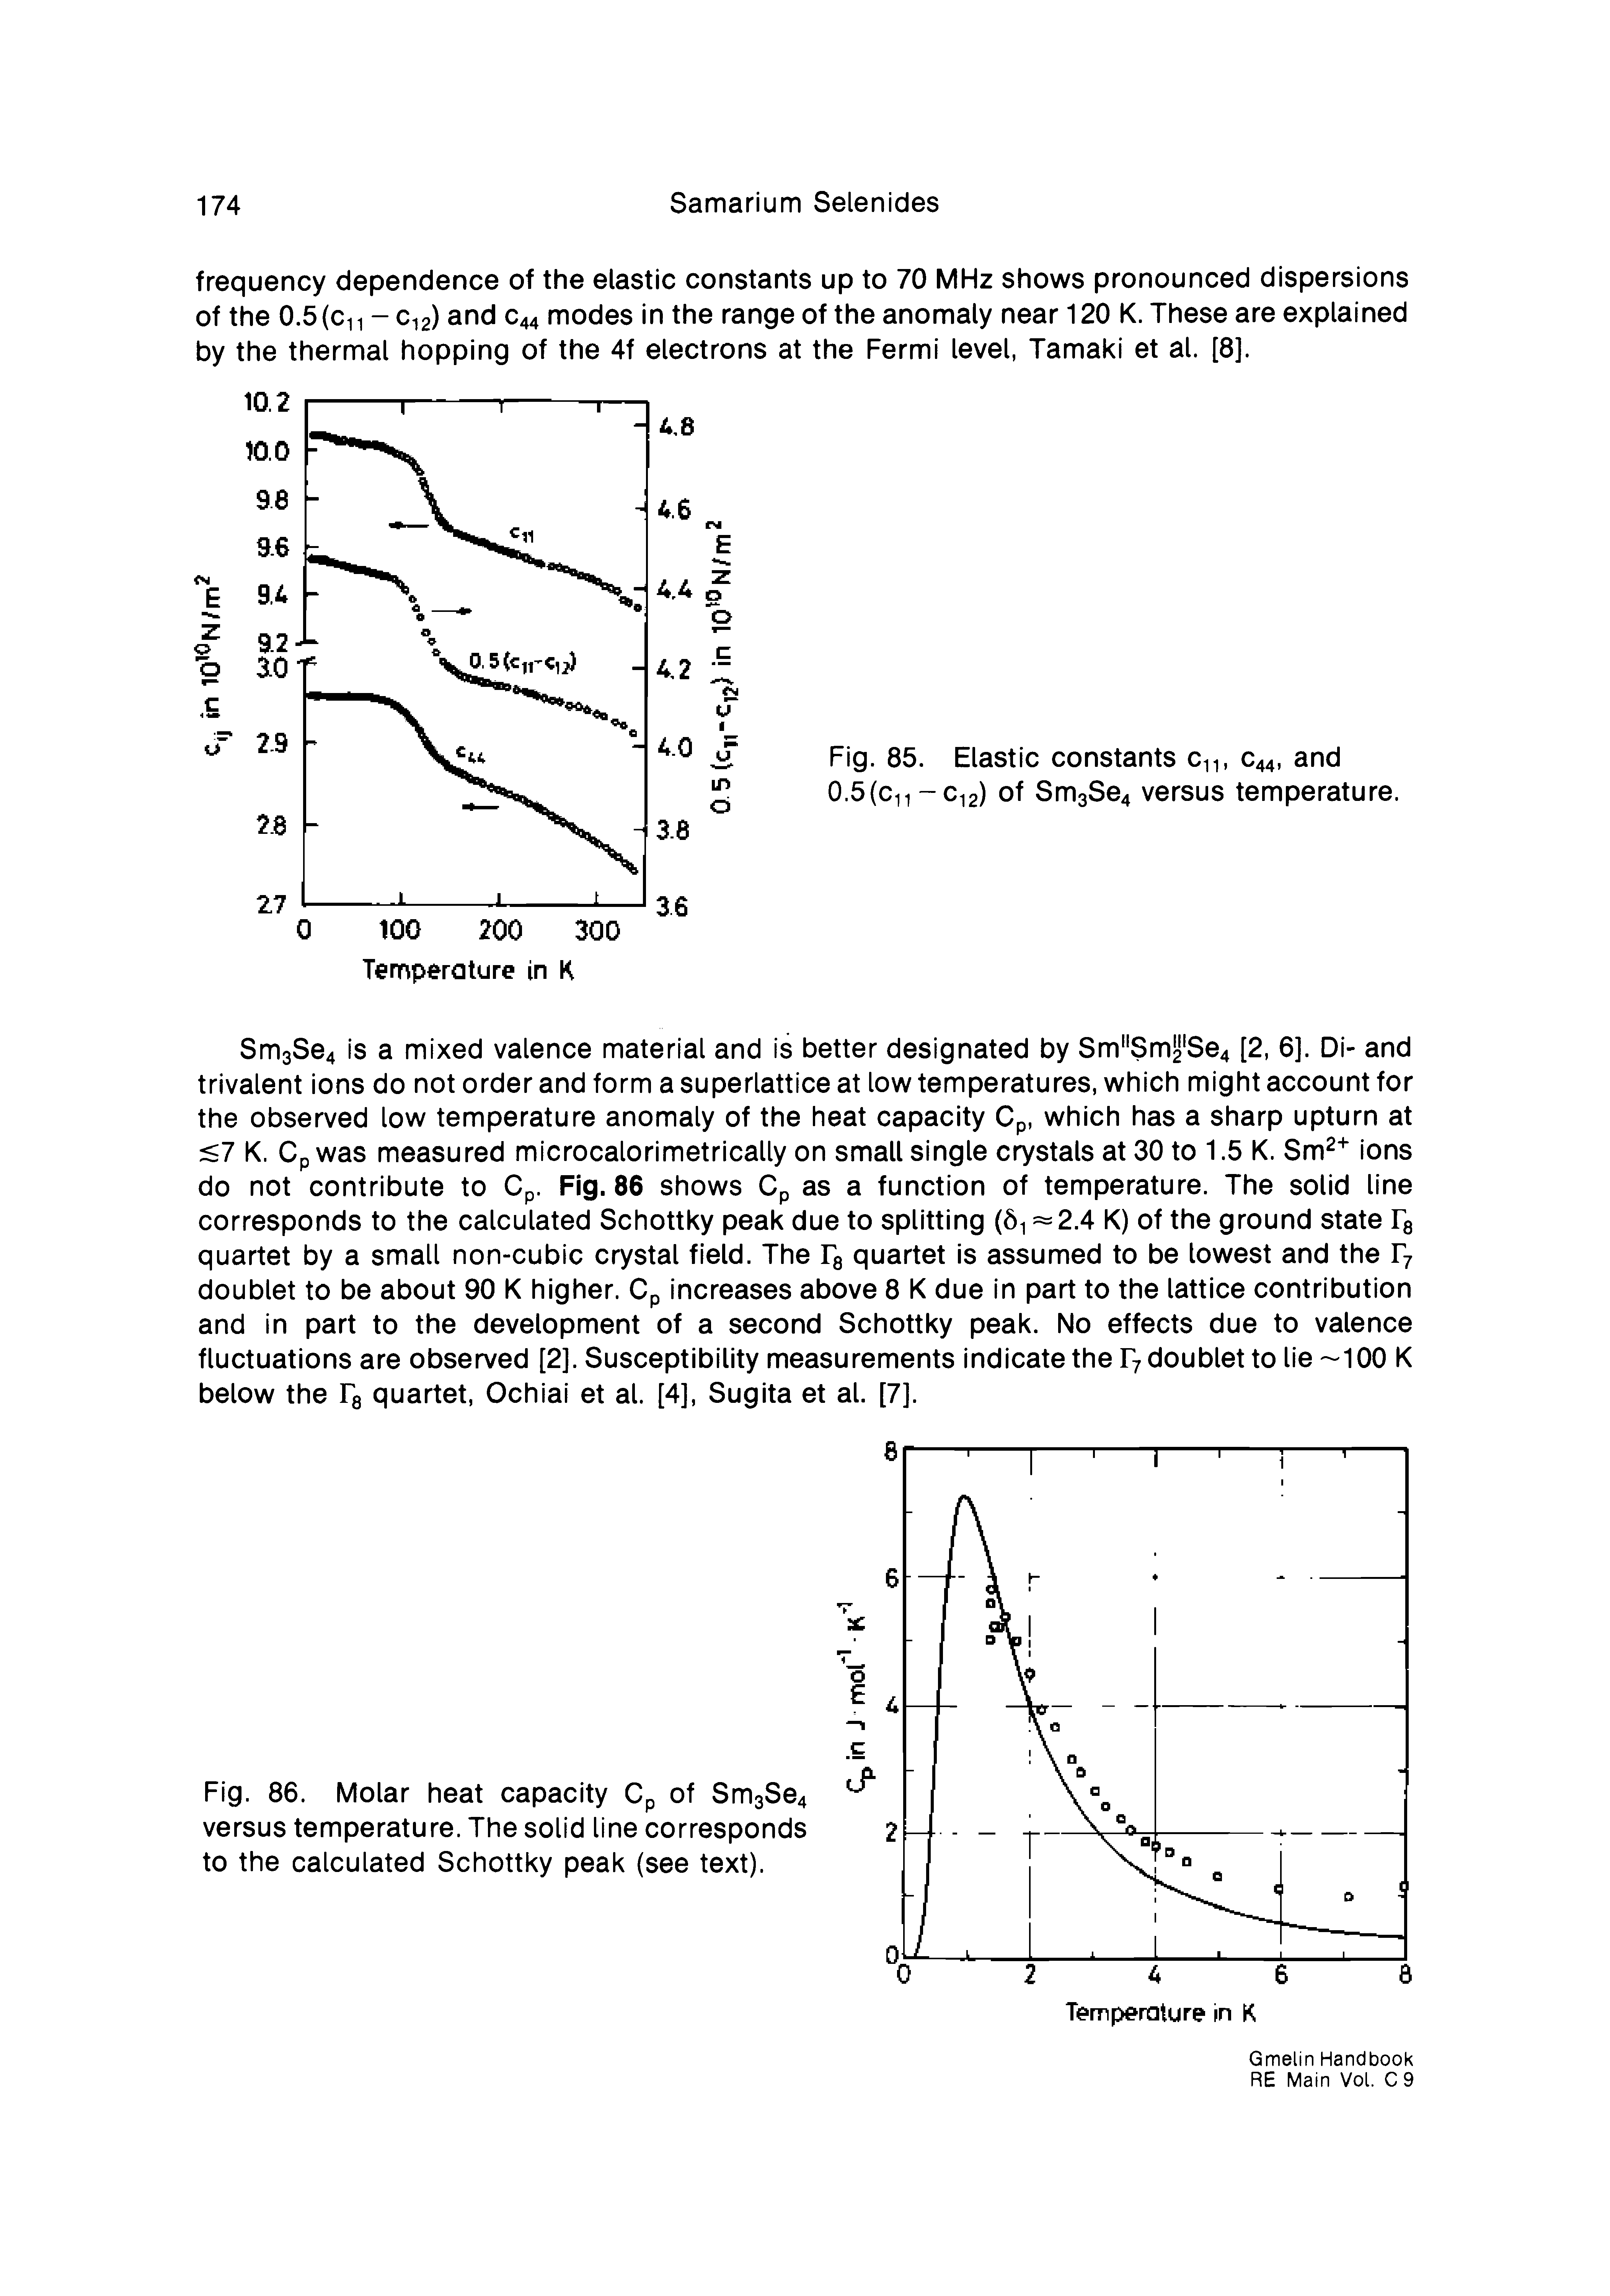 Fig. 86. Molar heat capacity Cp of Sm3Se4 versus temperature. The solid line corresponds to the calculated Schottky peak (see text).